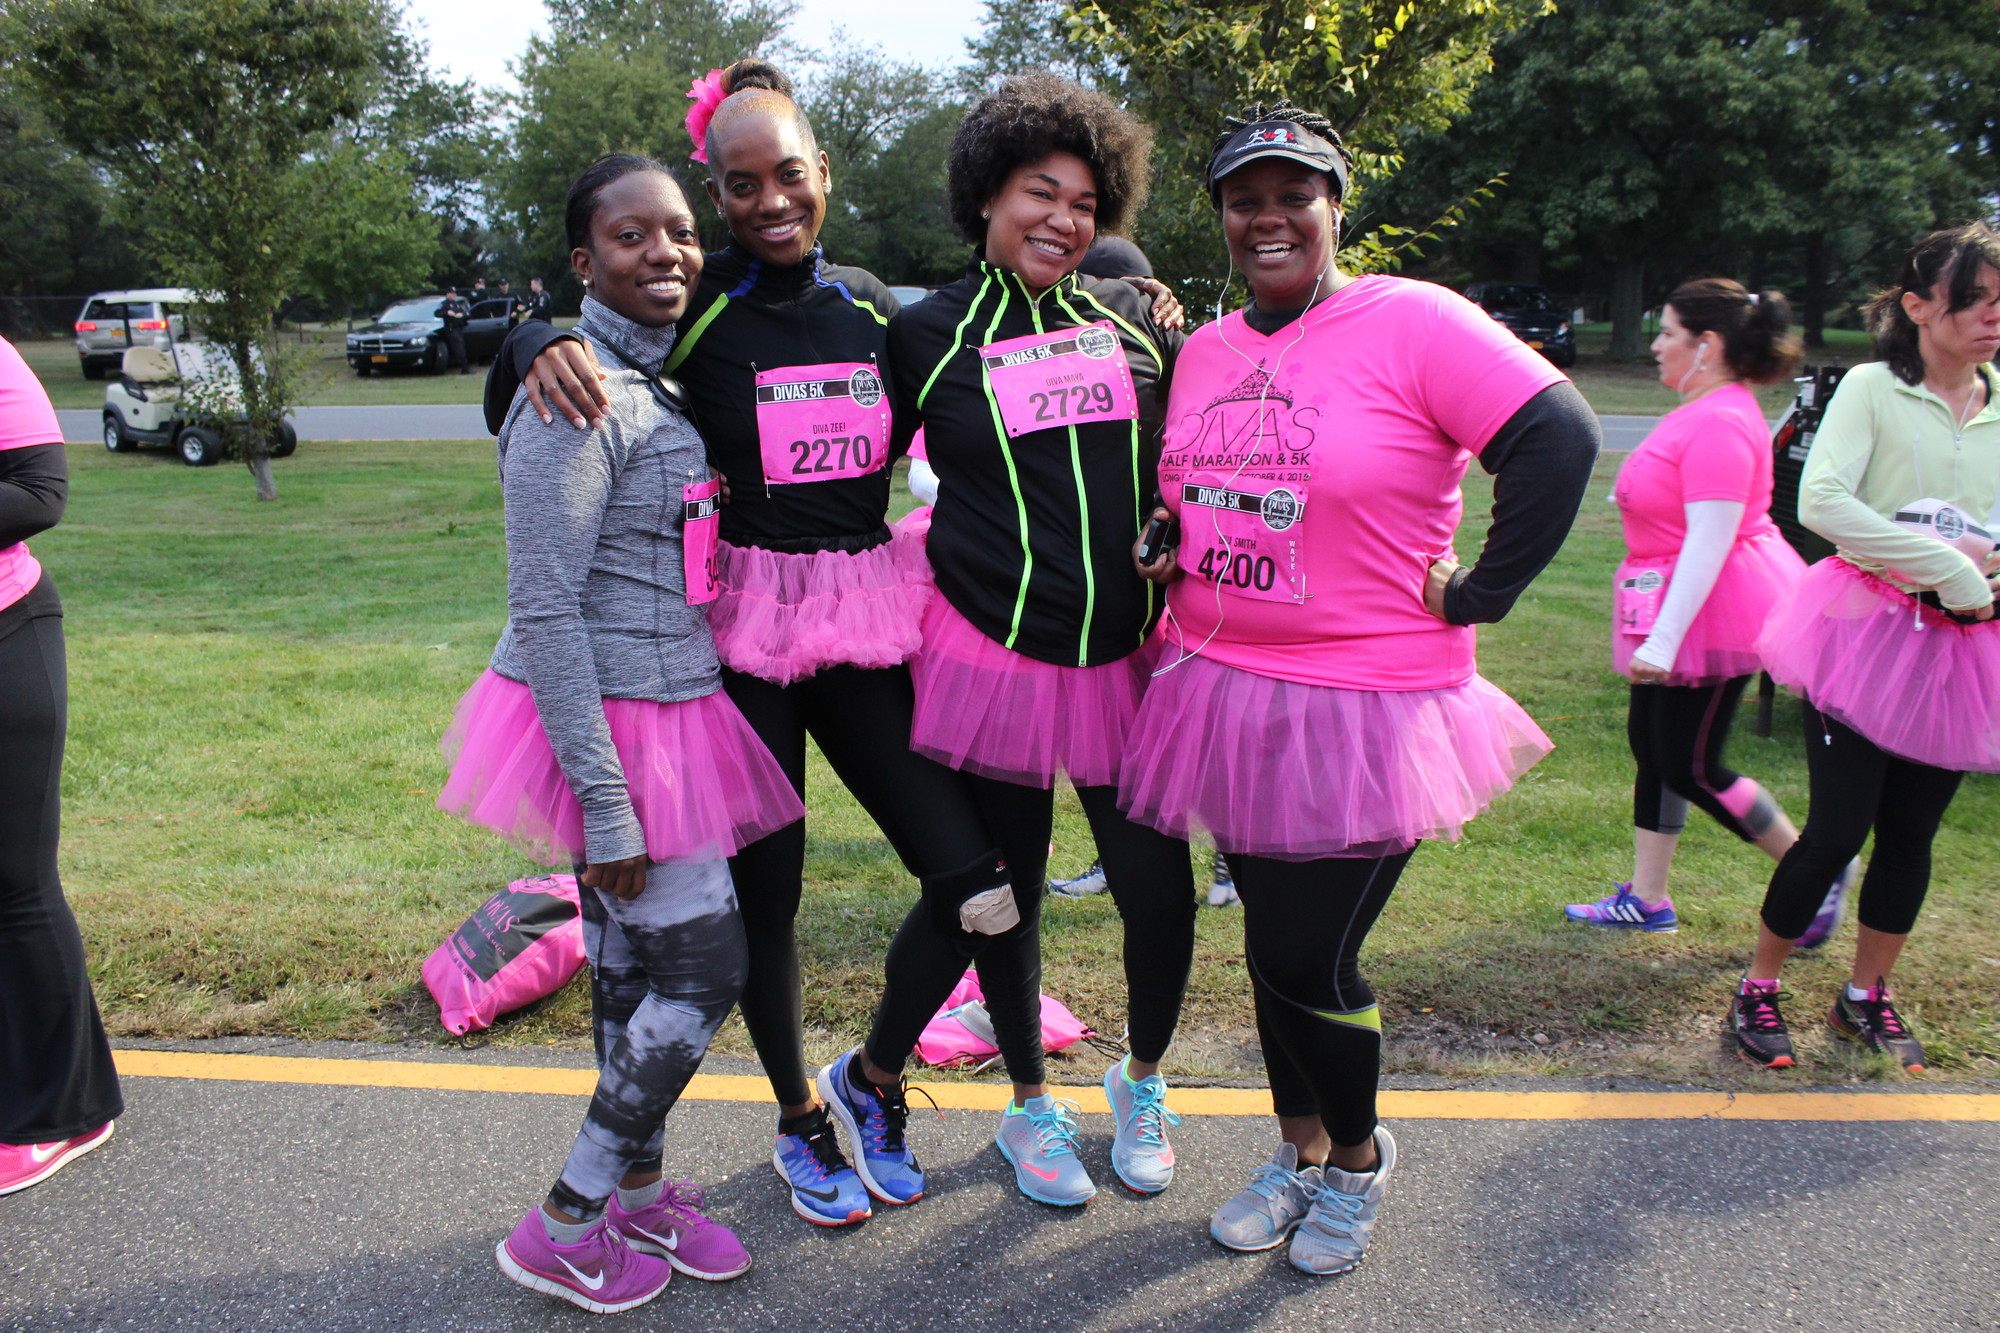 Charlene Jean, 31, left, of Elmont came out to run with fellow divas Zakiya Jenkins, 35, of St. Albans, Queens, Maya Cox, 36, also of St. Albans, and Lashawn Smith, 34, of Laurelton, Queens.